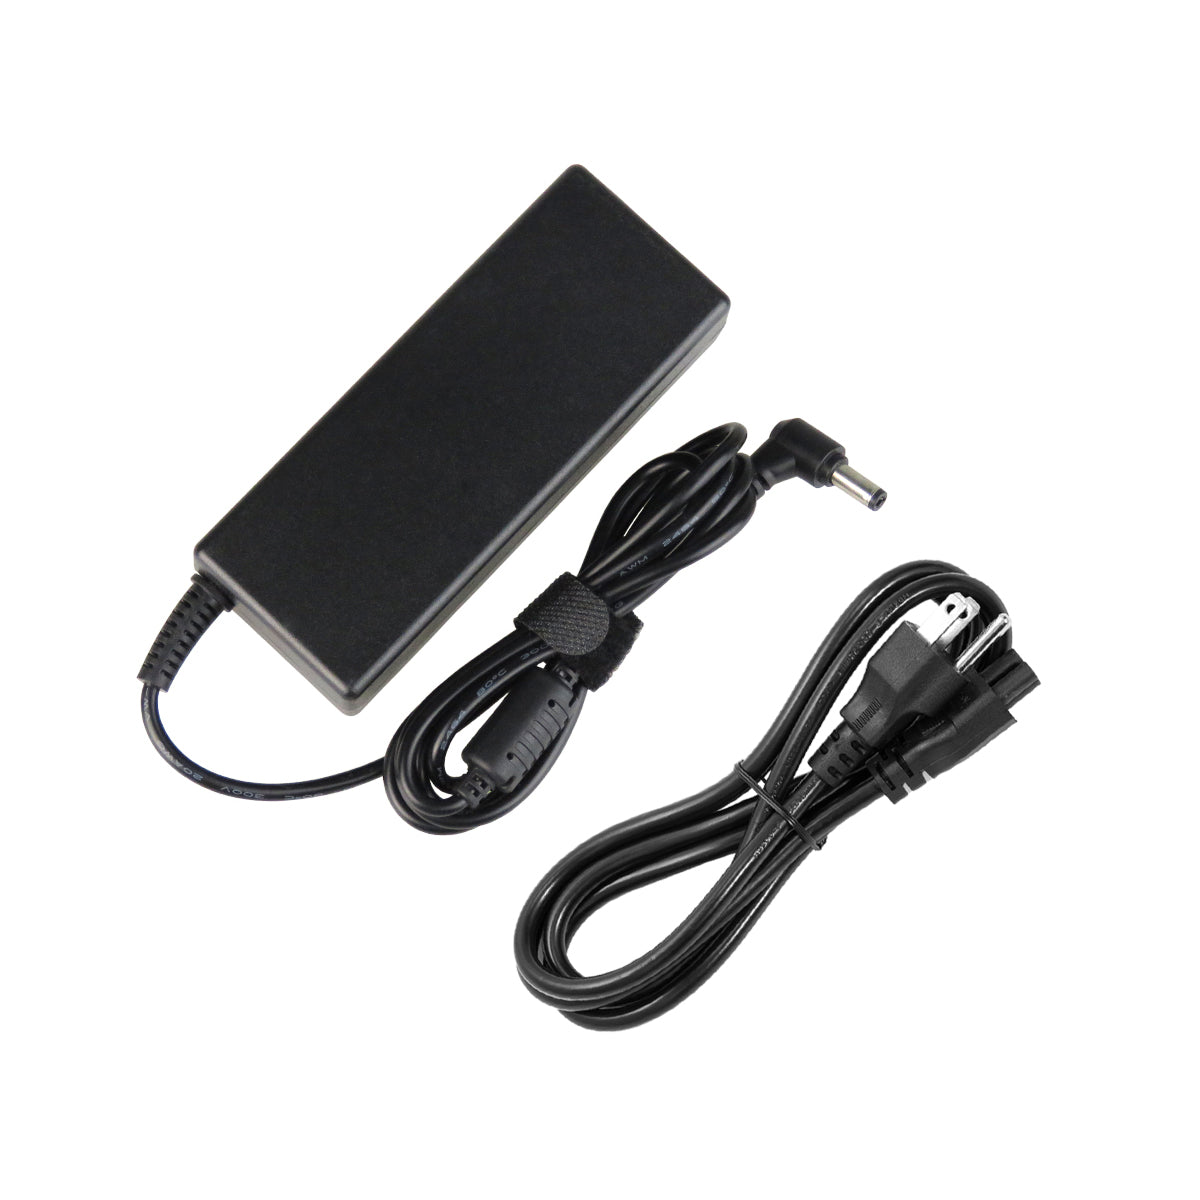 AC Adapter Charger for ASUS X57 Series Notebook.